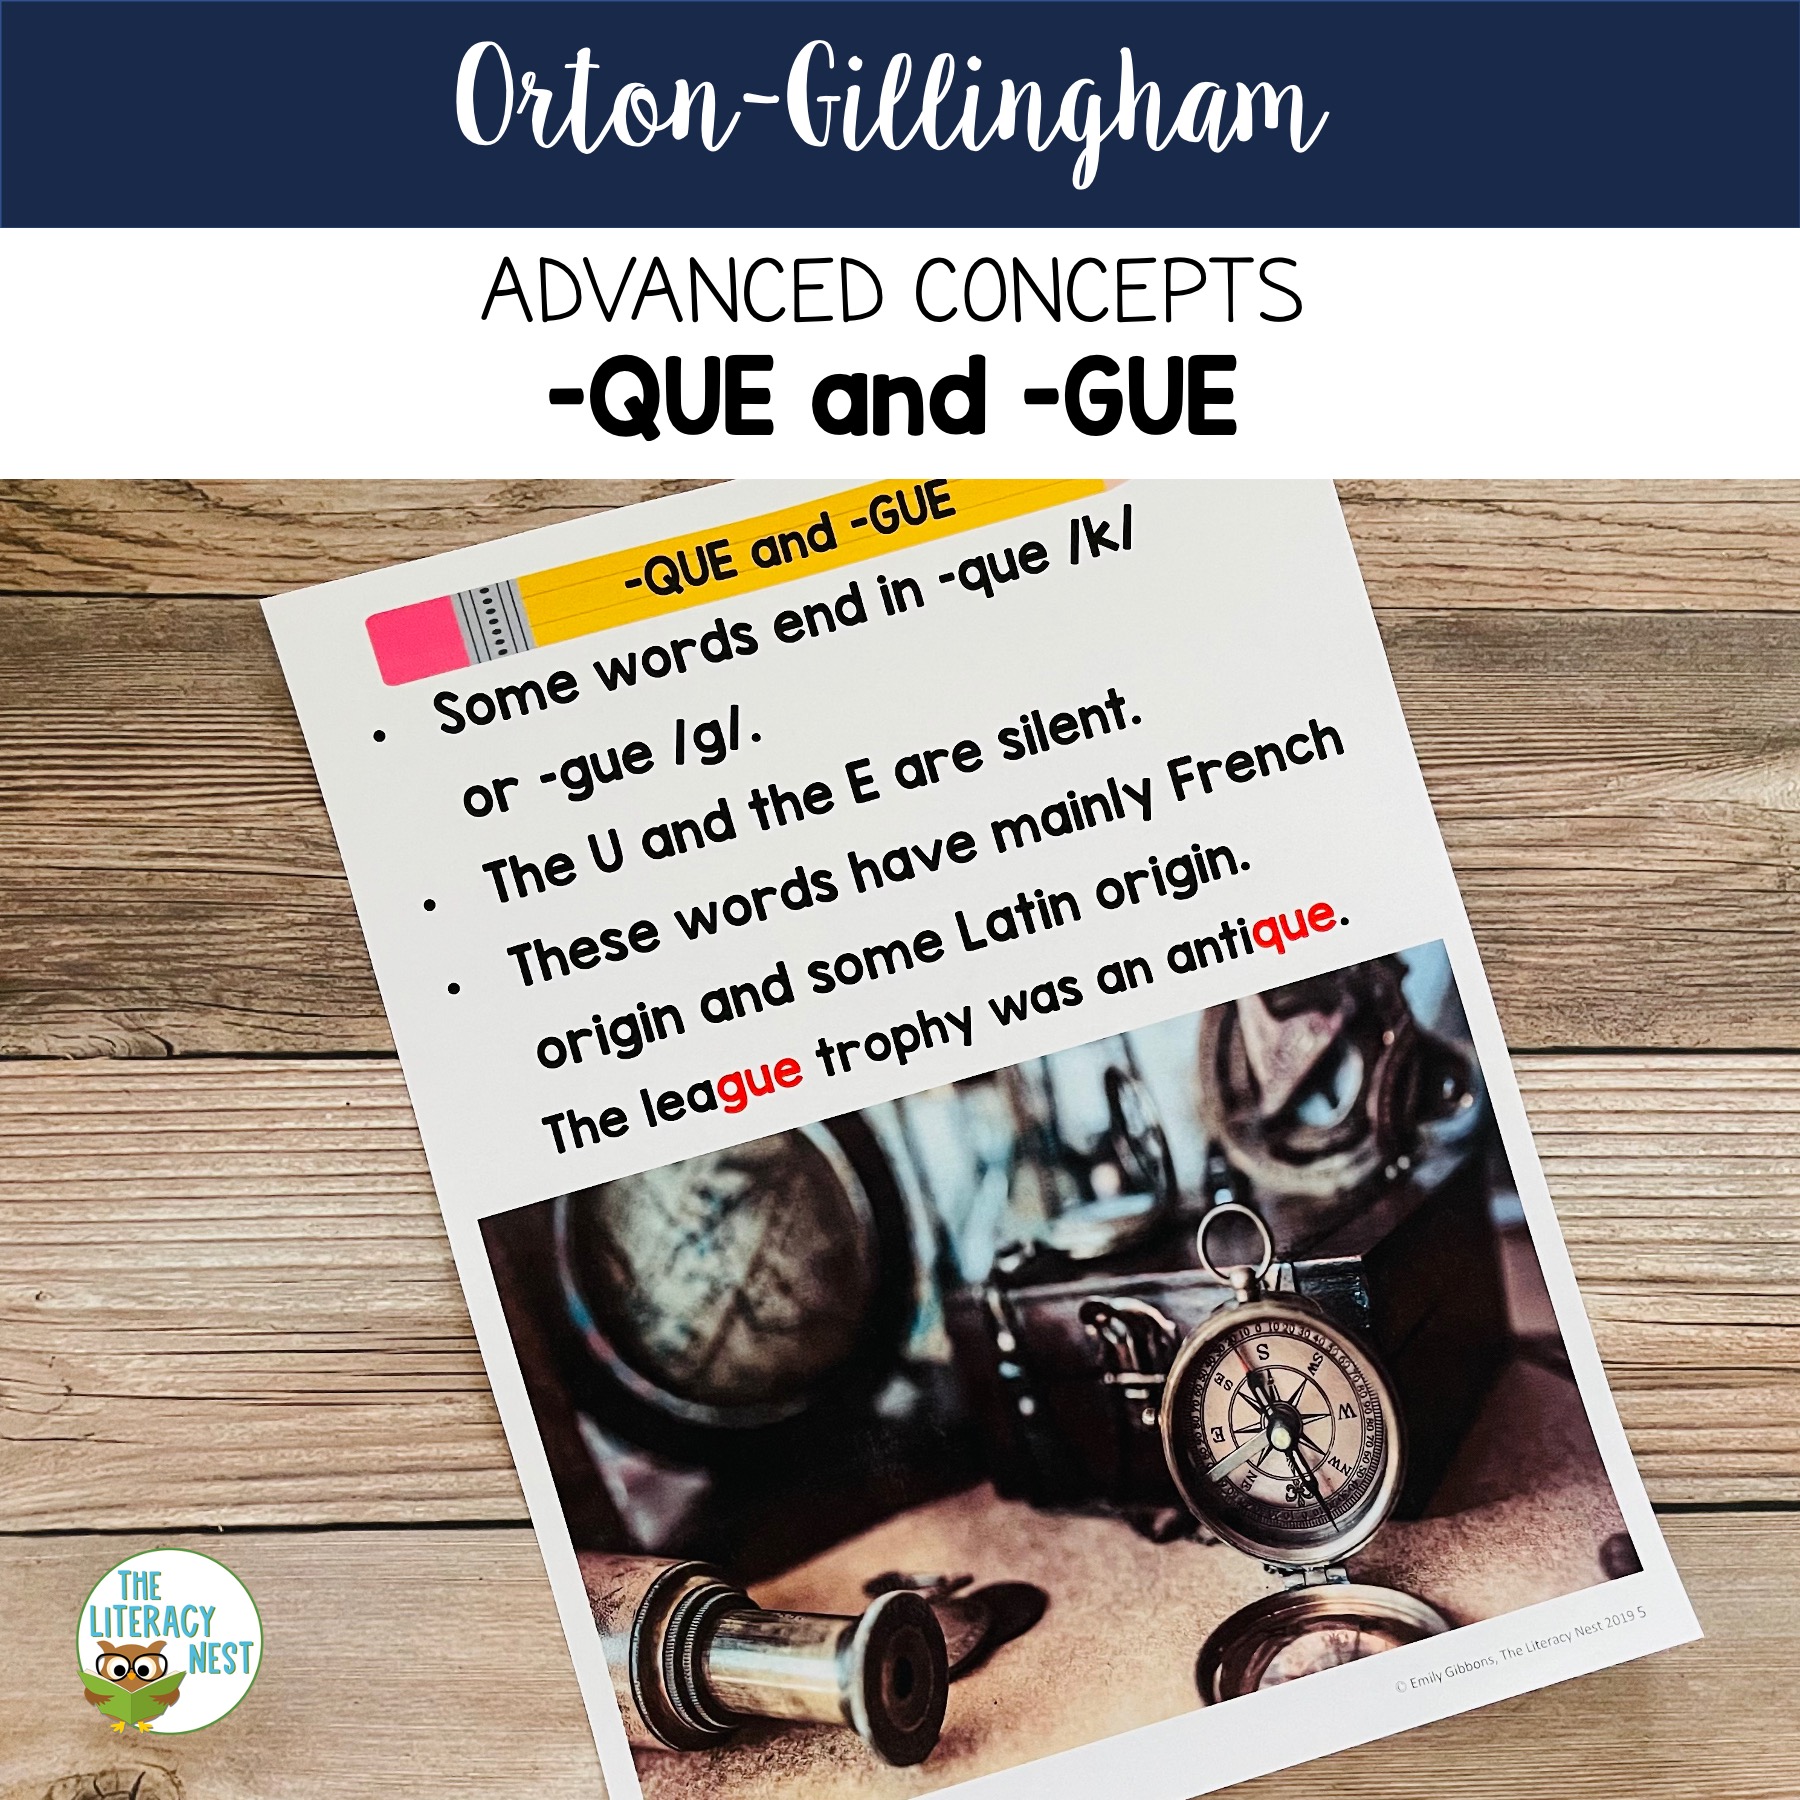 advanced-orton-gillingham-activities-for-que-and-gue-word-list-builder